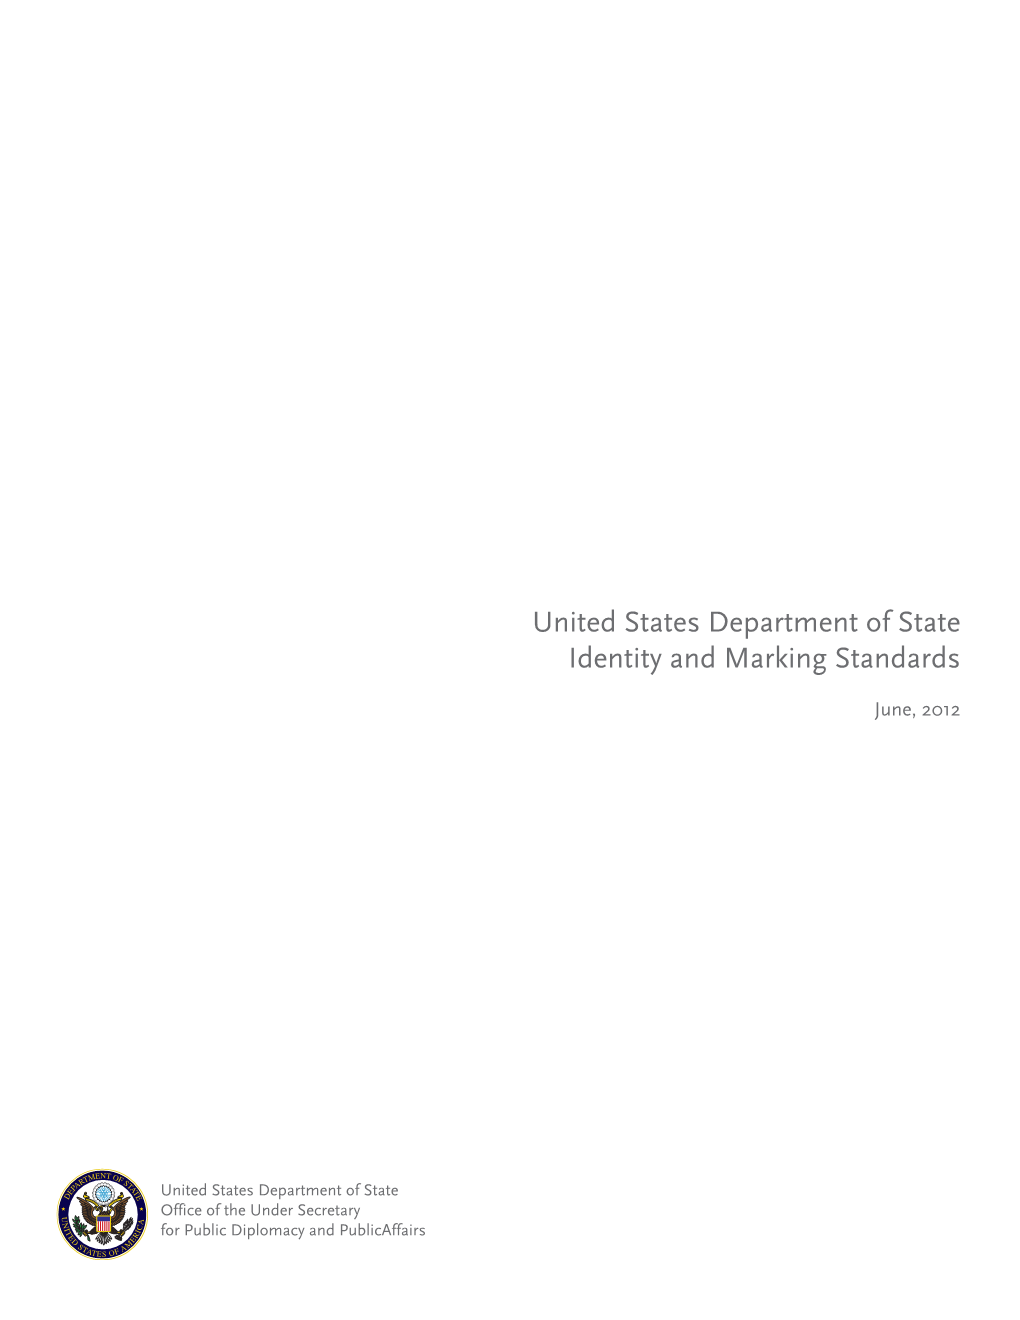 United States Department of State Identity and Marking Standards